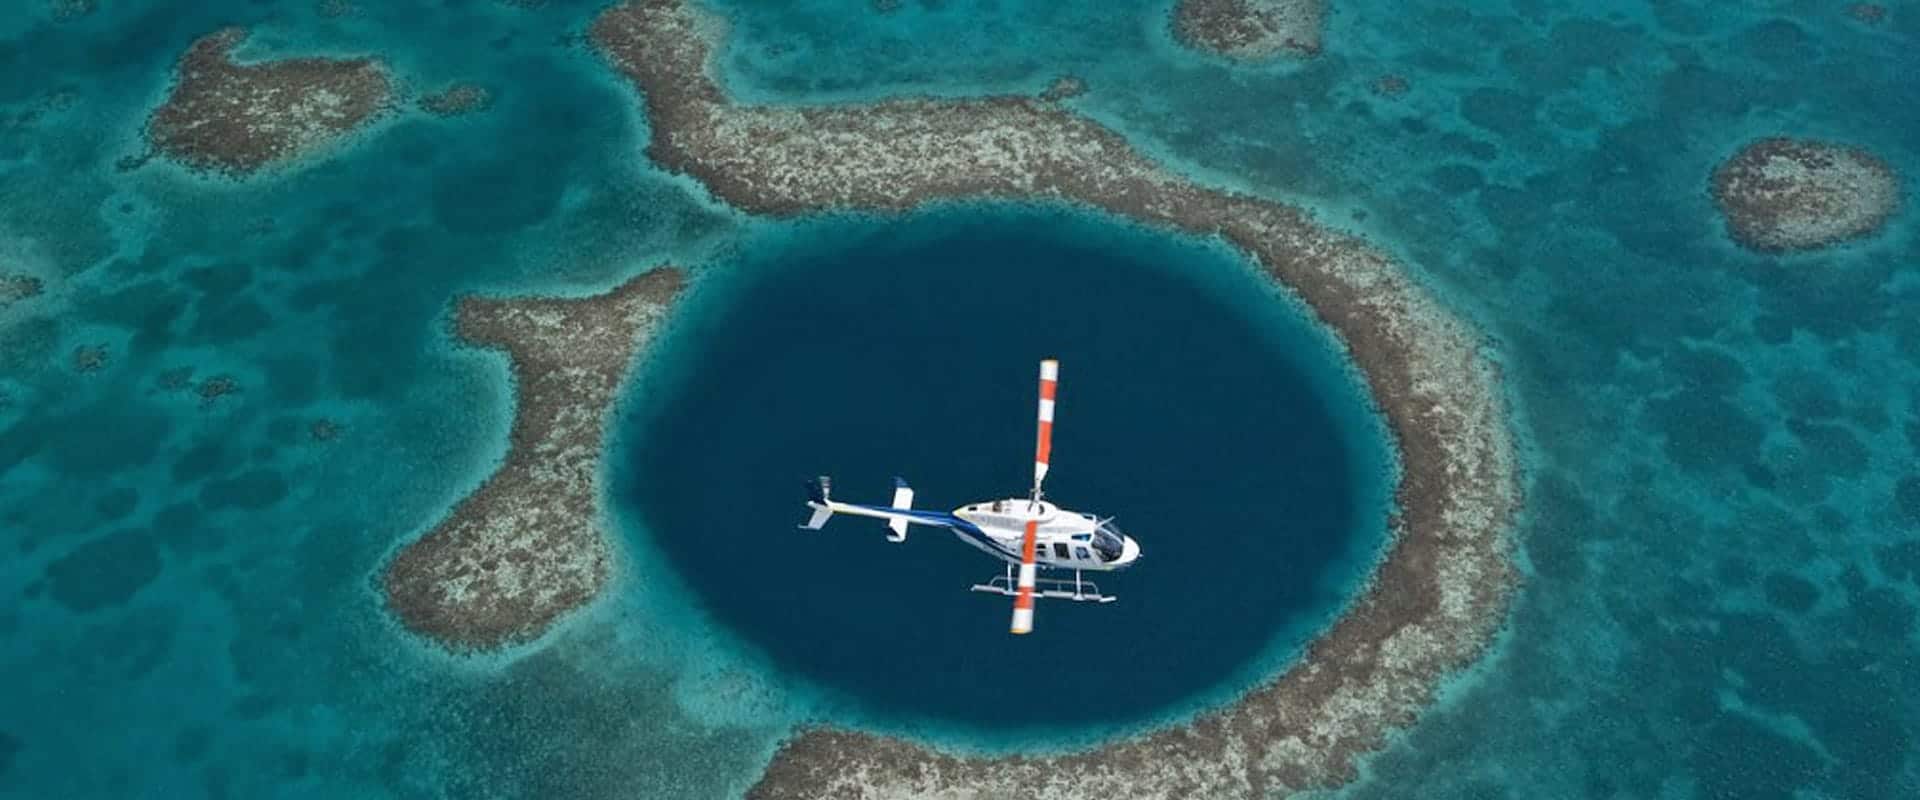 Helicopter aerial tours over the Great Blue Hole offered at Victoria House Resort and Spa